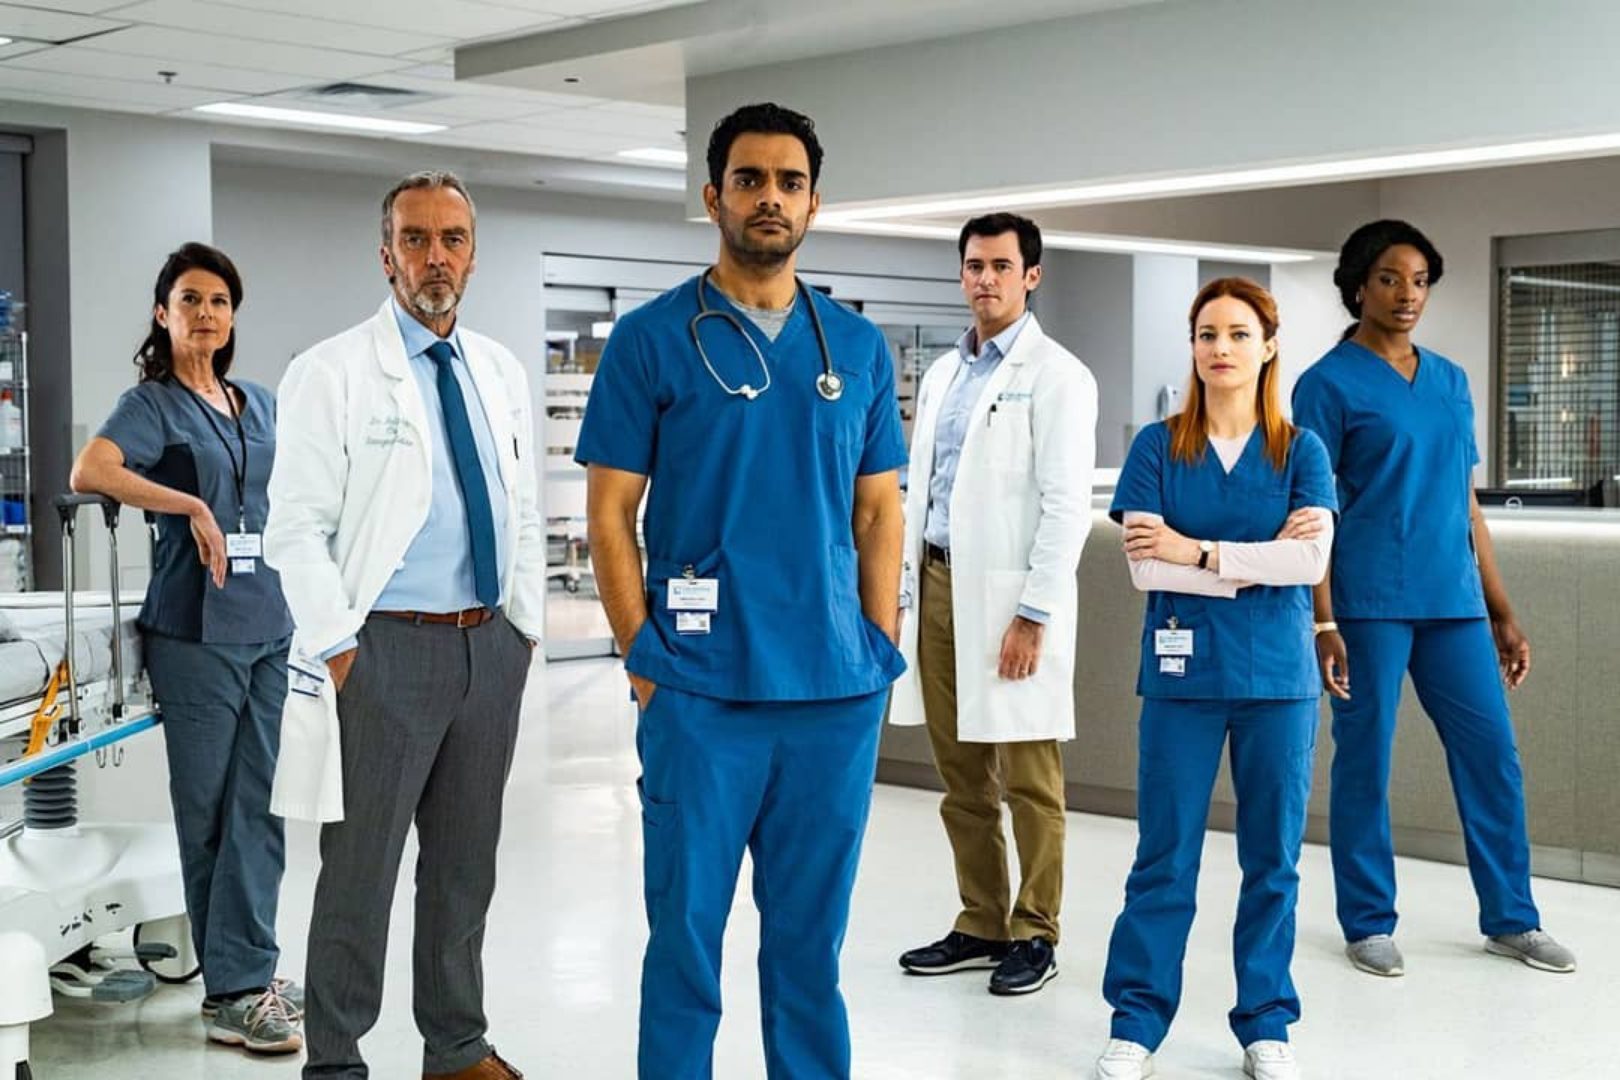 How To Watch Transplant Season 2 In The UK, USA and Australia